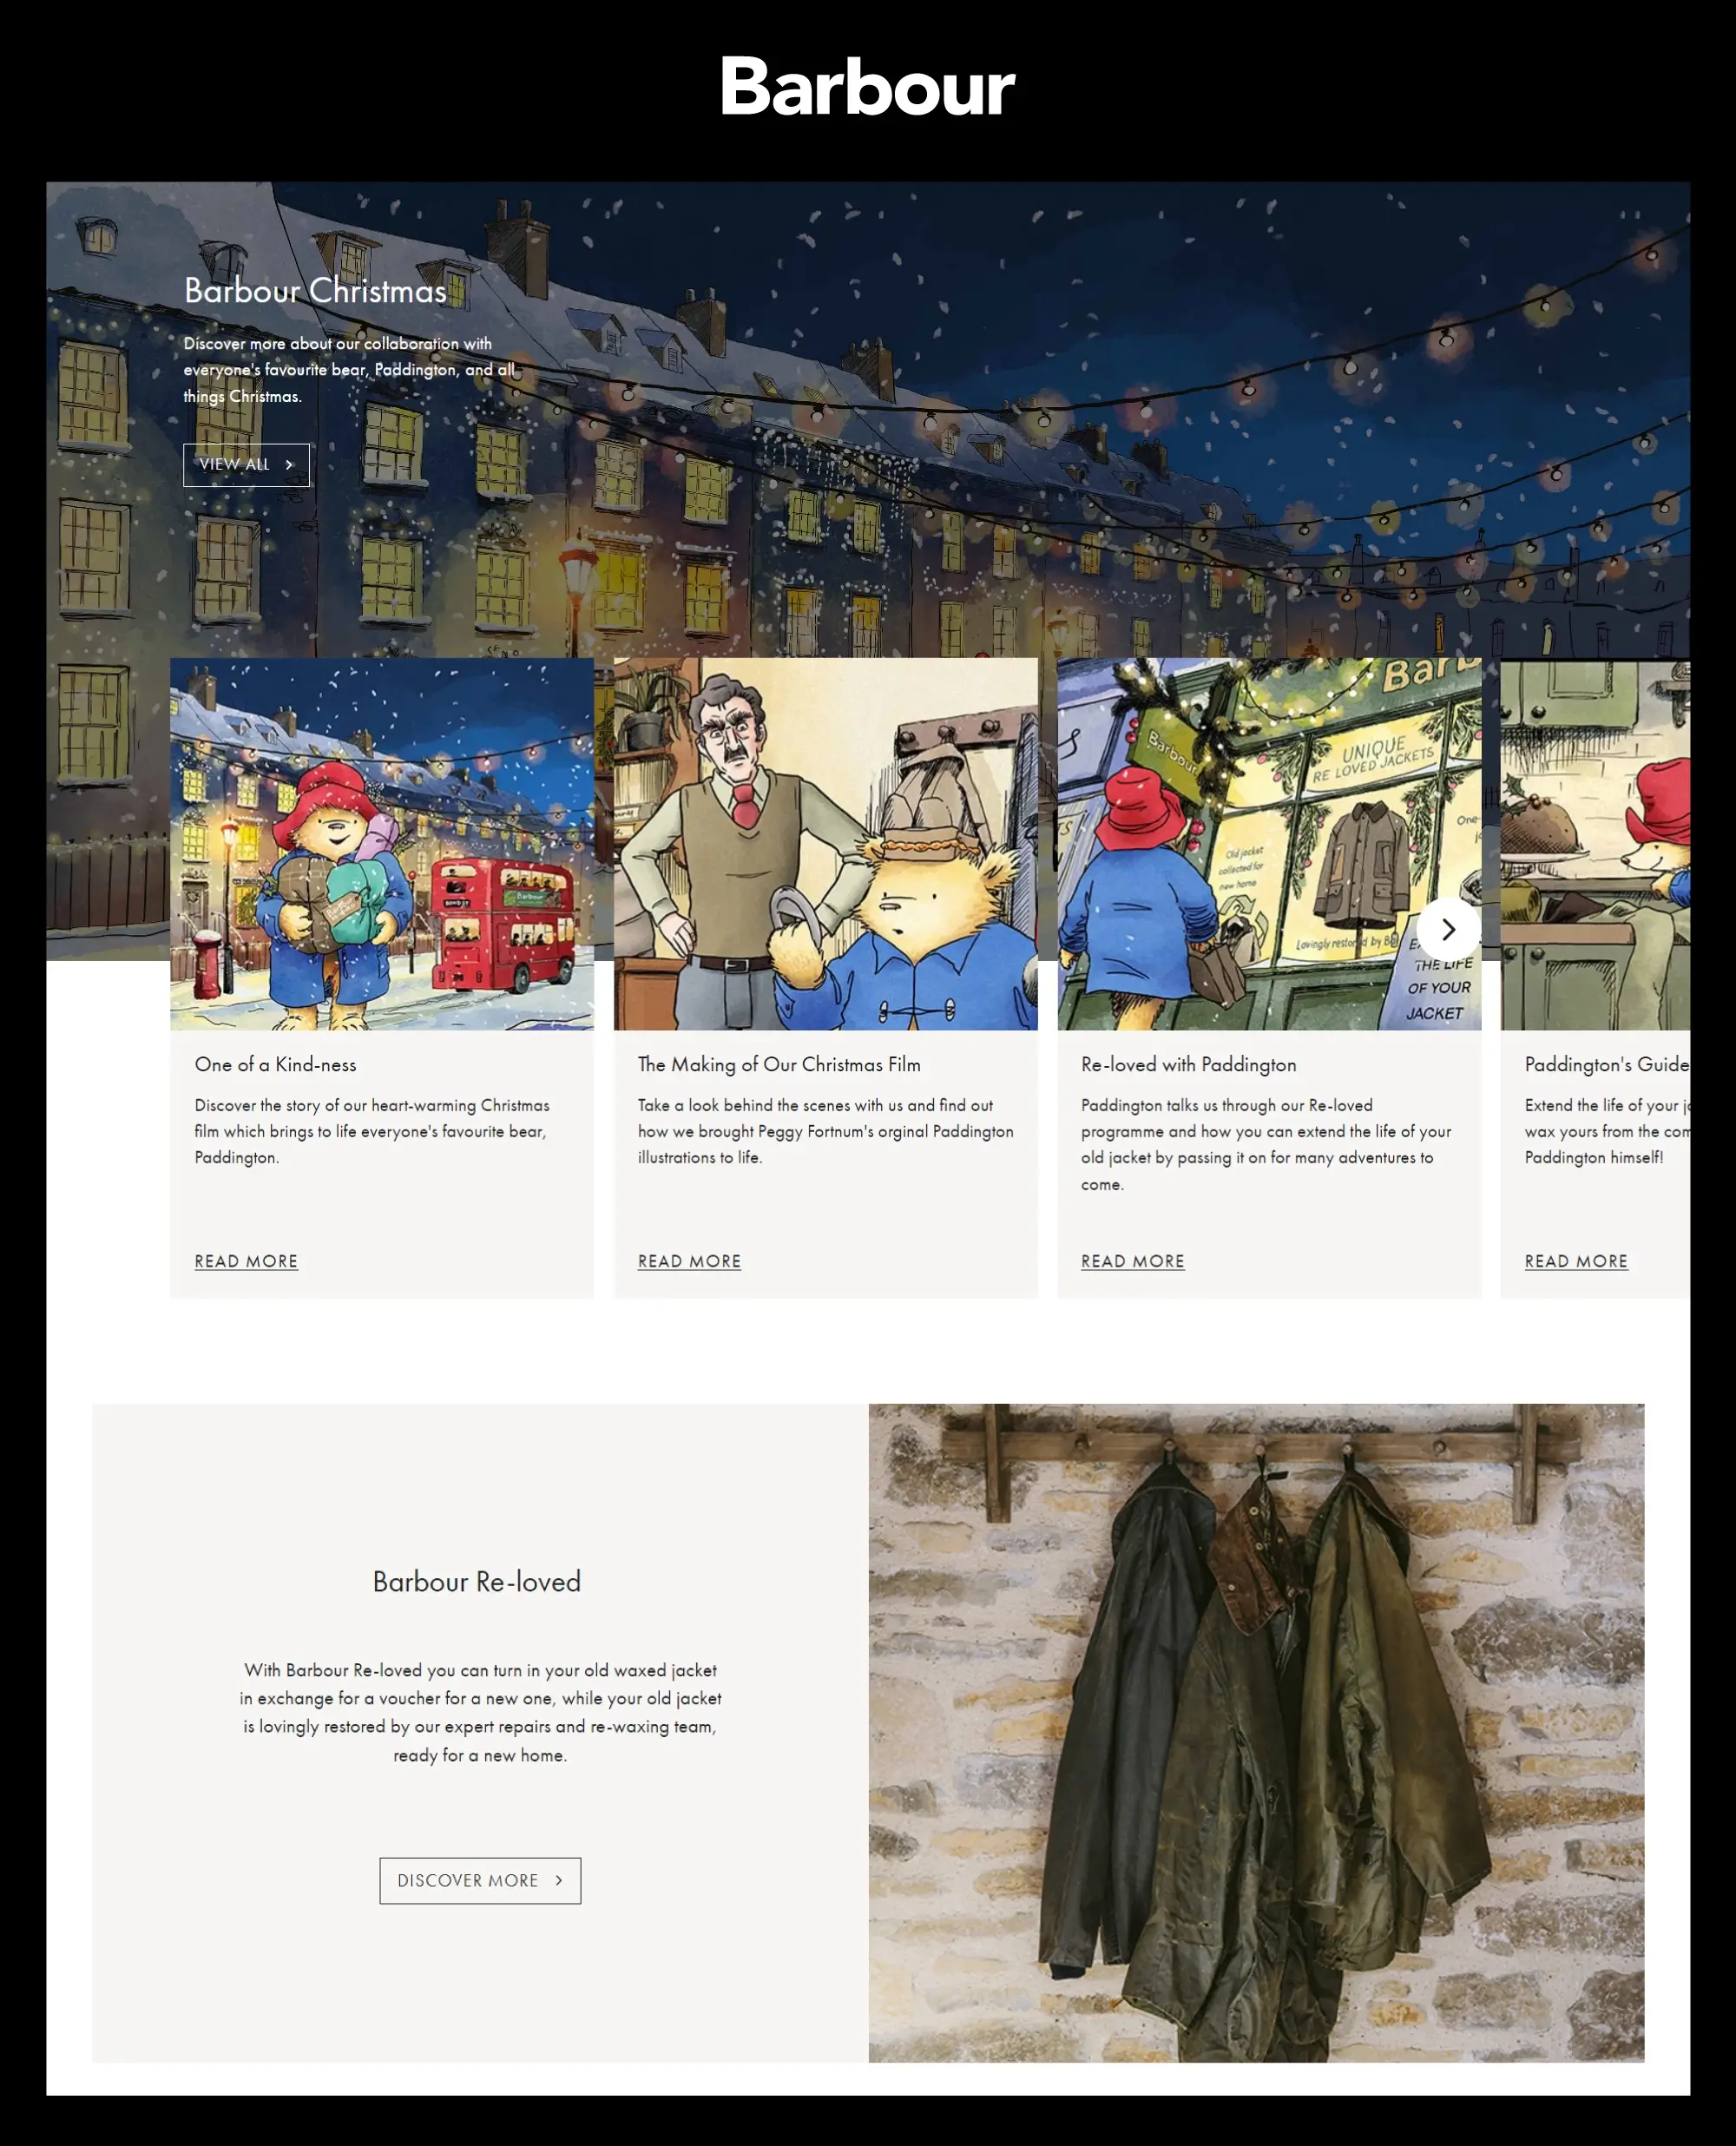 Barbour Paddington with mr. curry cartoon illustrations banners on homepage website optimization promotion of Christmas advert 3 Barbour jackets hung on a railing Reloved program 